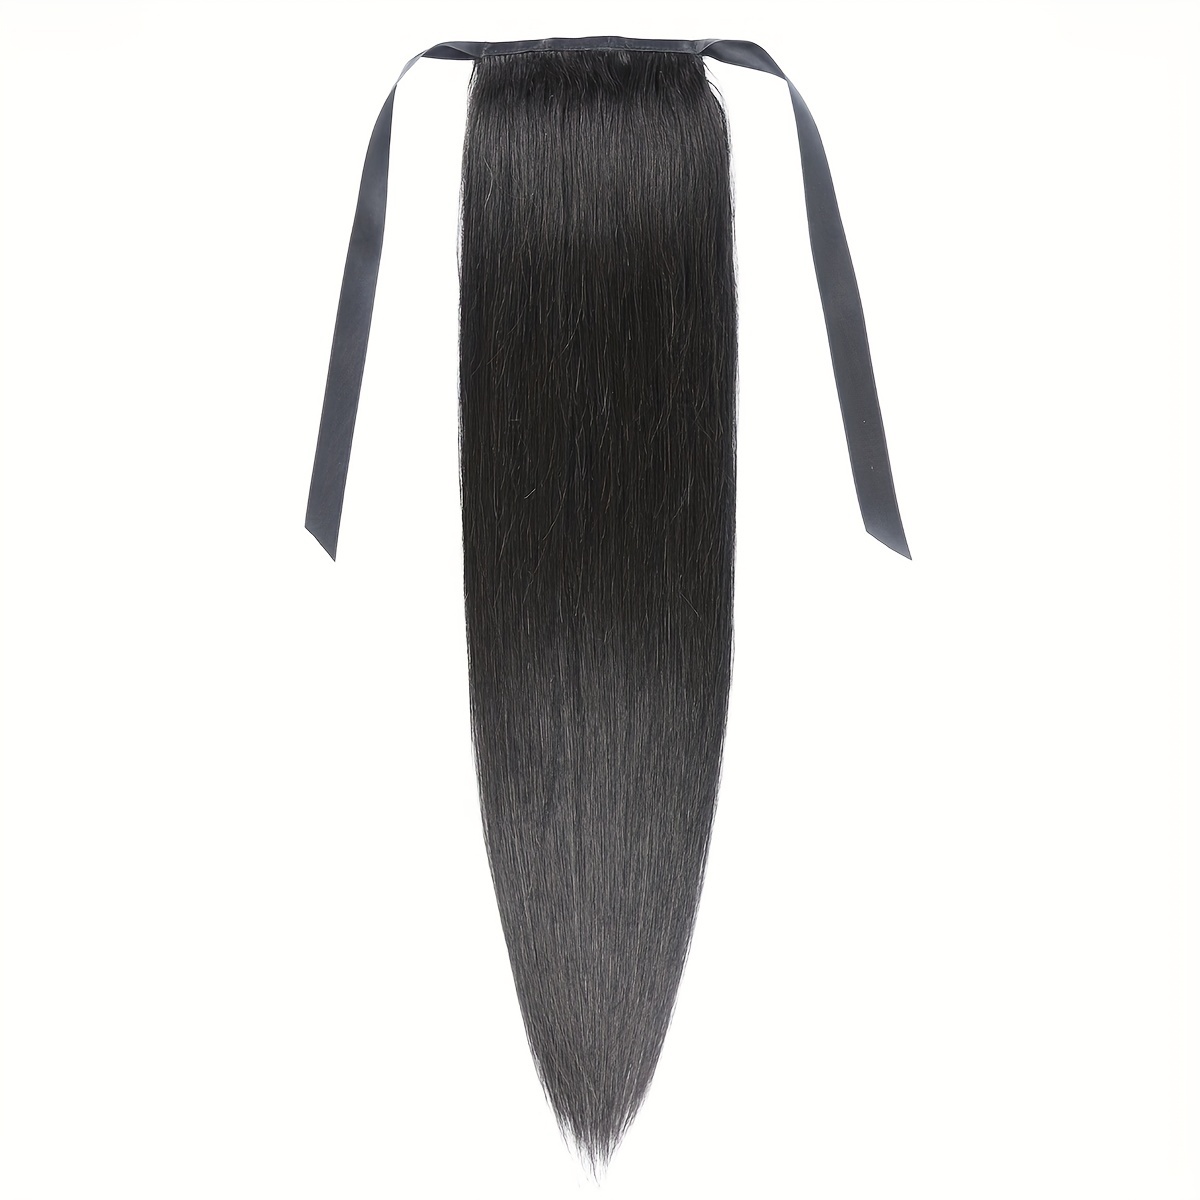 

Long Straight Ponytail Extensions With Ribbon Tie Wrap Around Ponytail Human Hair Extension Natural Black Color Extensions For Women Girls